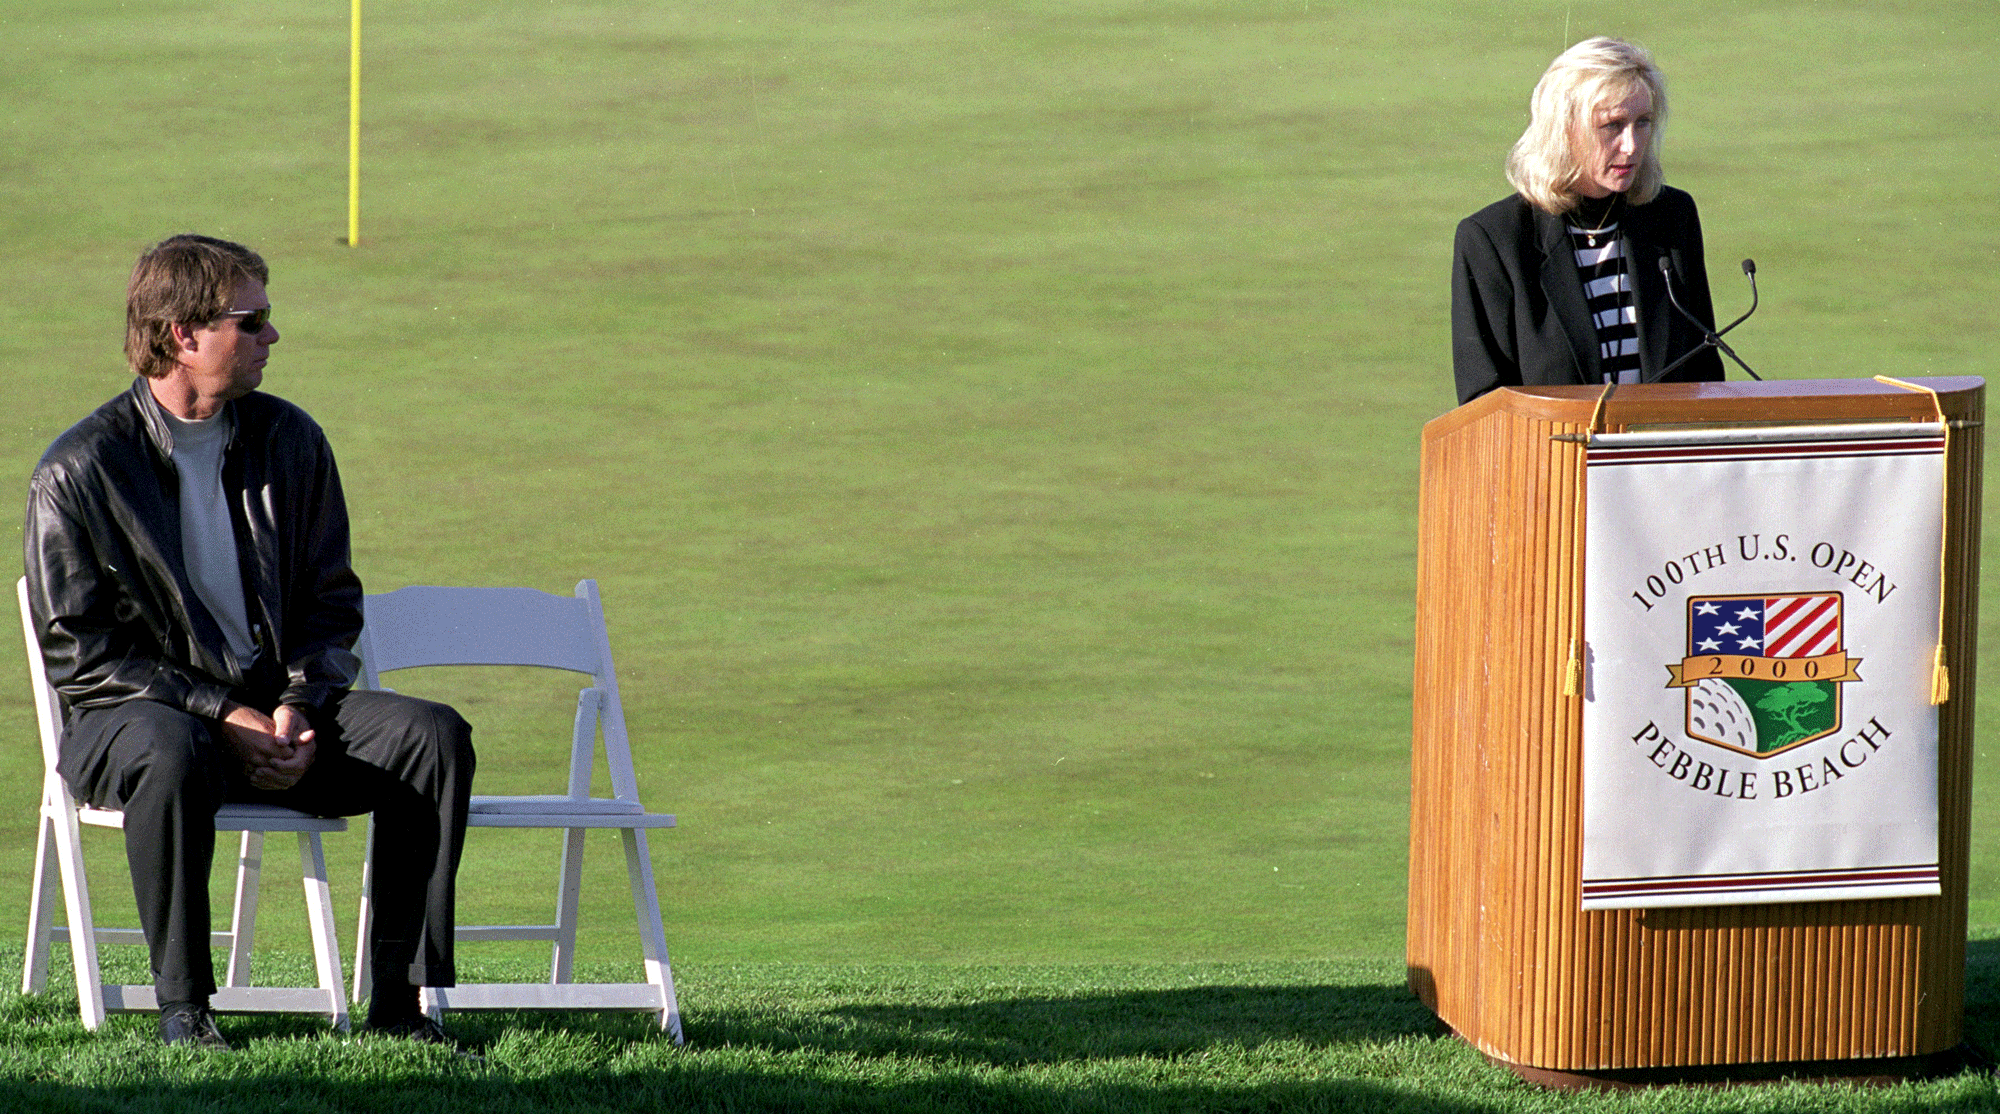 Azinger and Payne's wife, Tracey, helped commemorate Payne at the 2000 U.S. Open at Pebble Beach. 